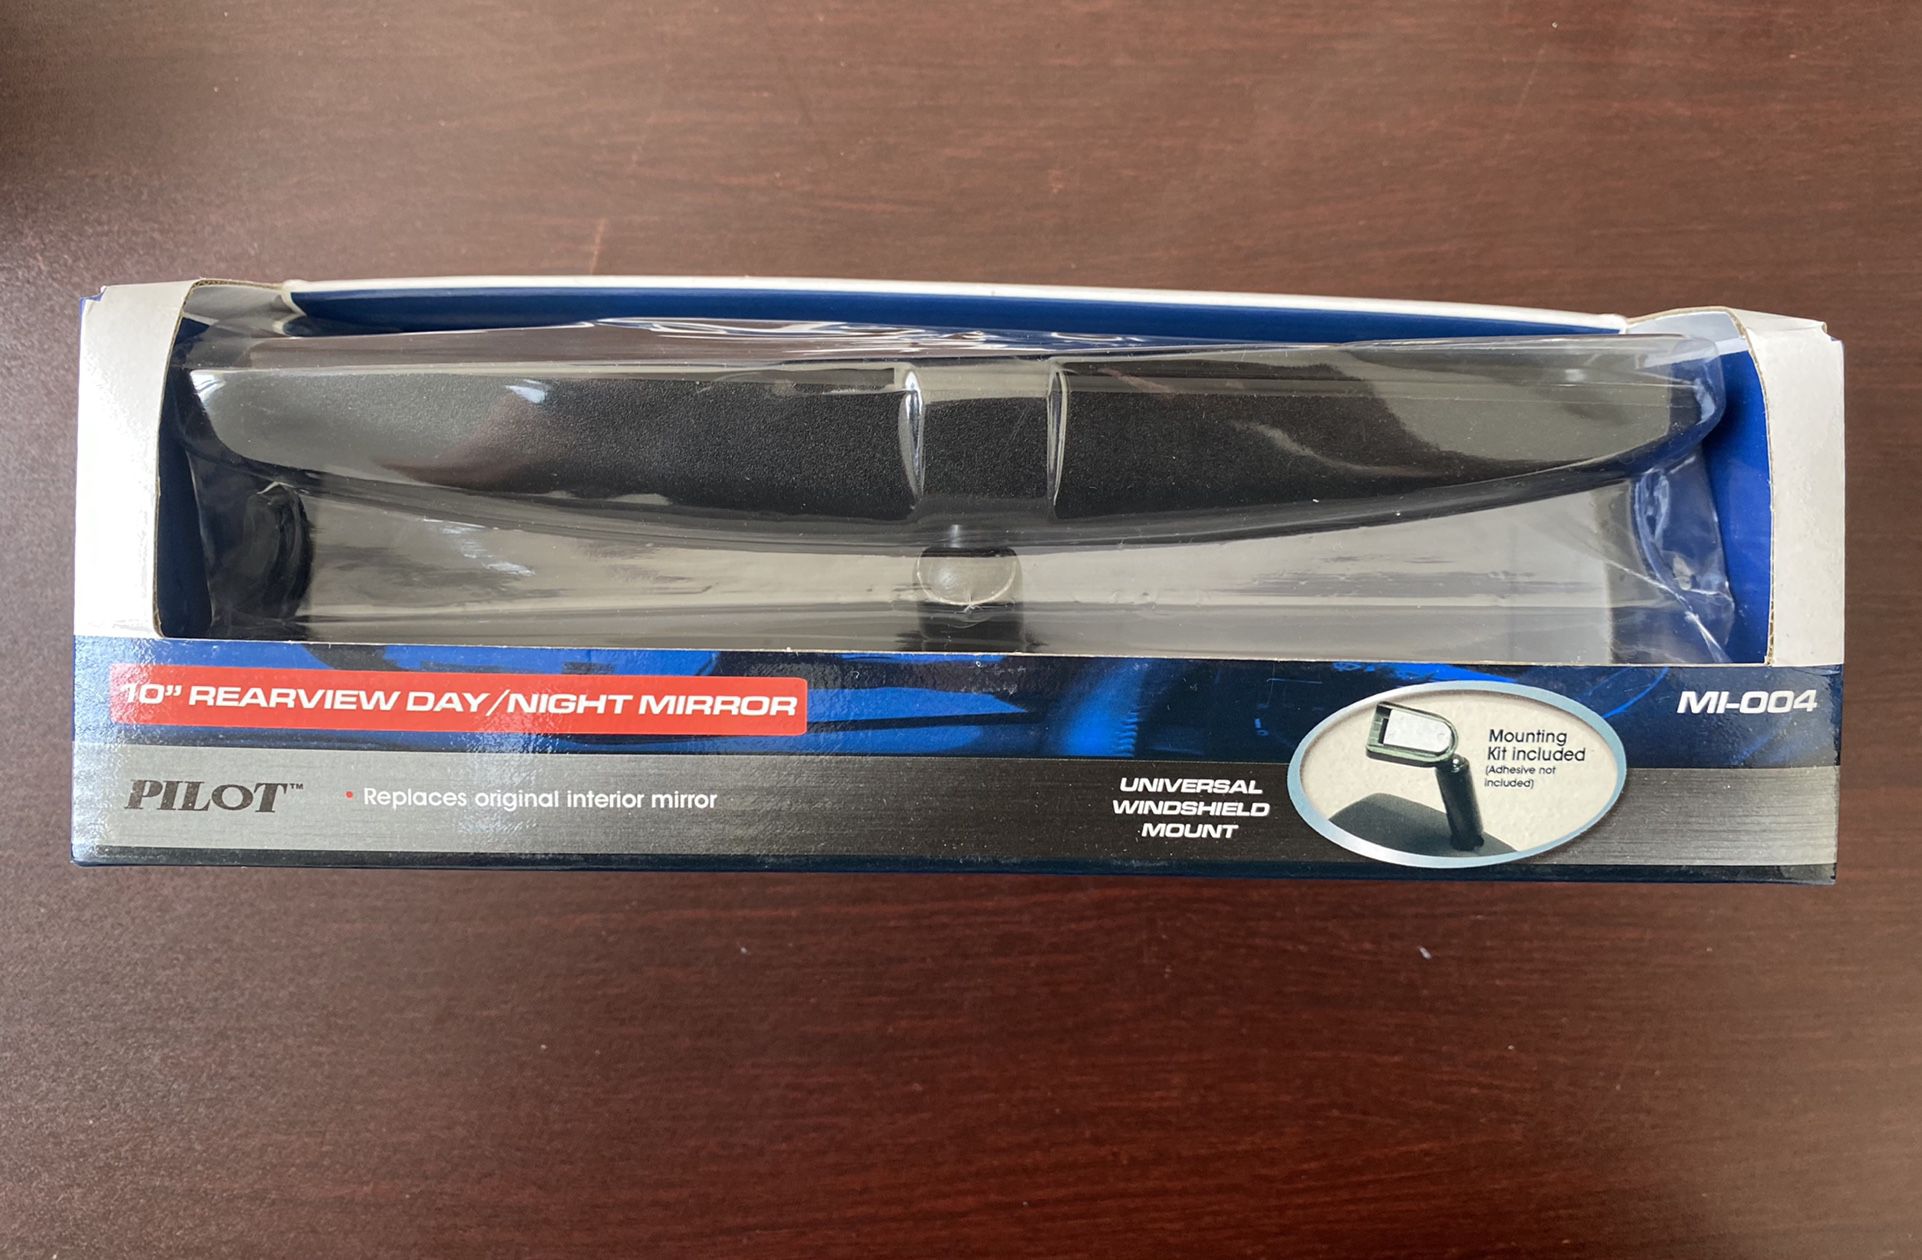 PILOT 10 Inch Rearview Day/ Night Mirror New